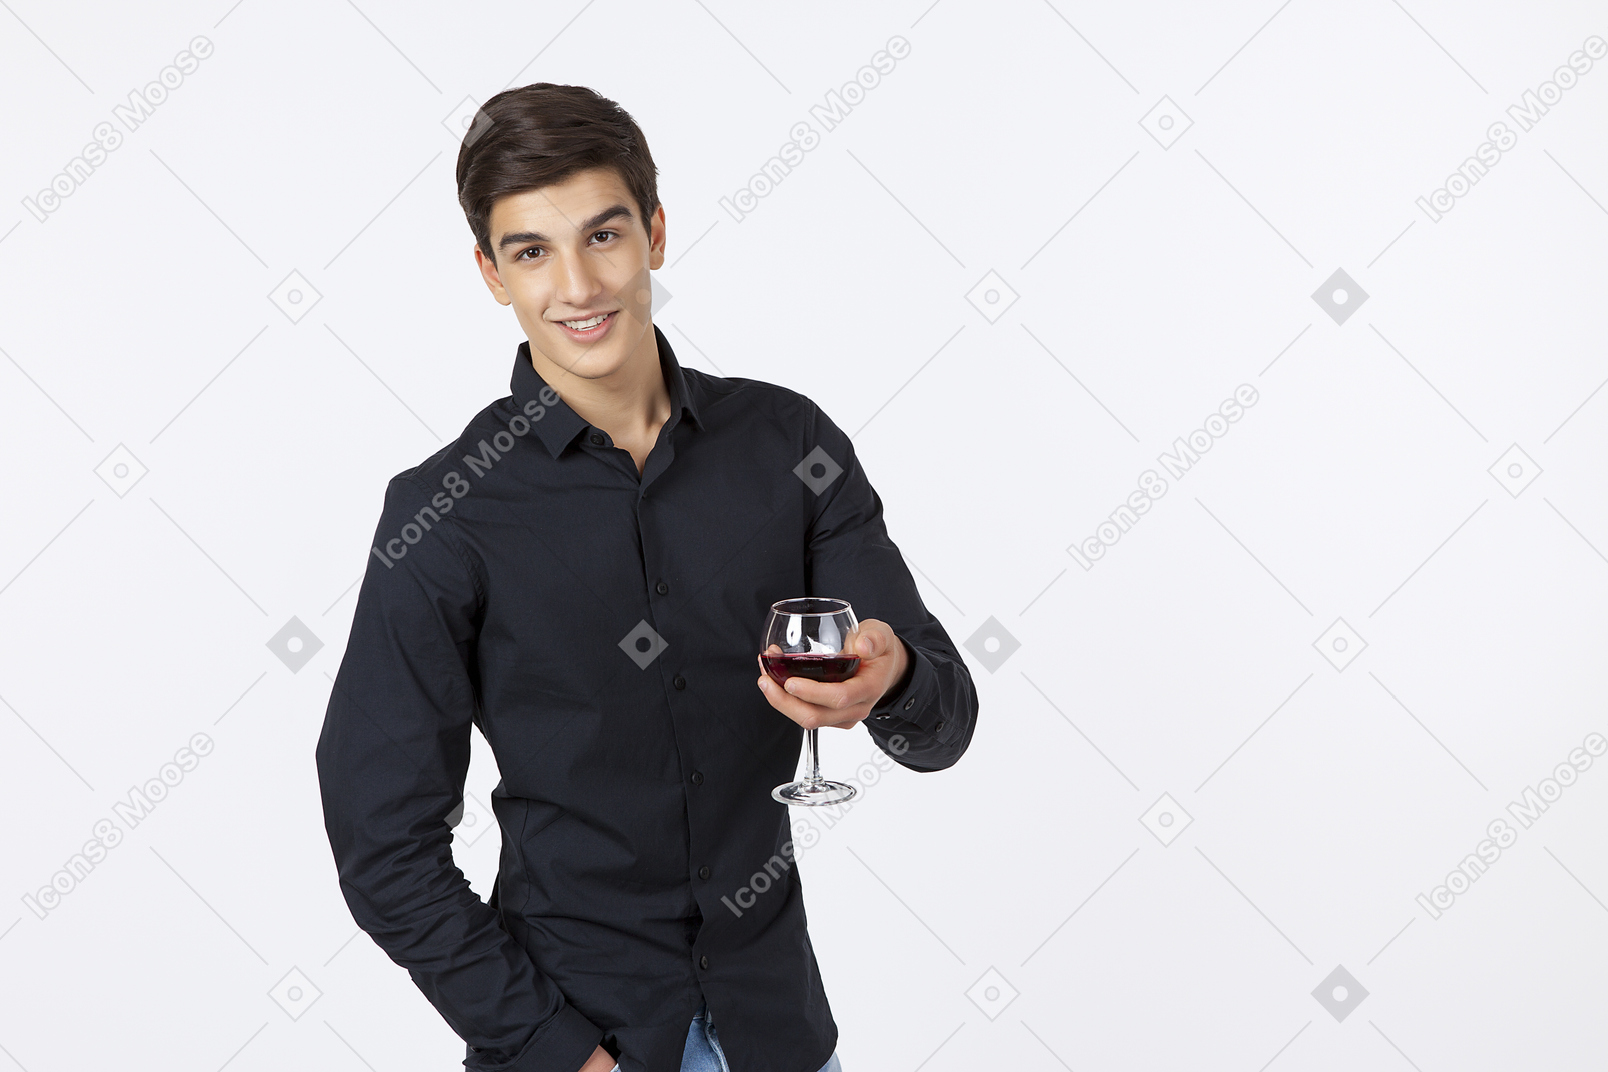 Having a good time with a glass of wine